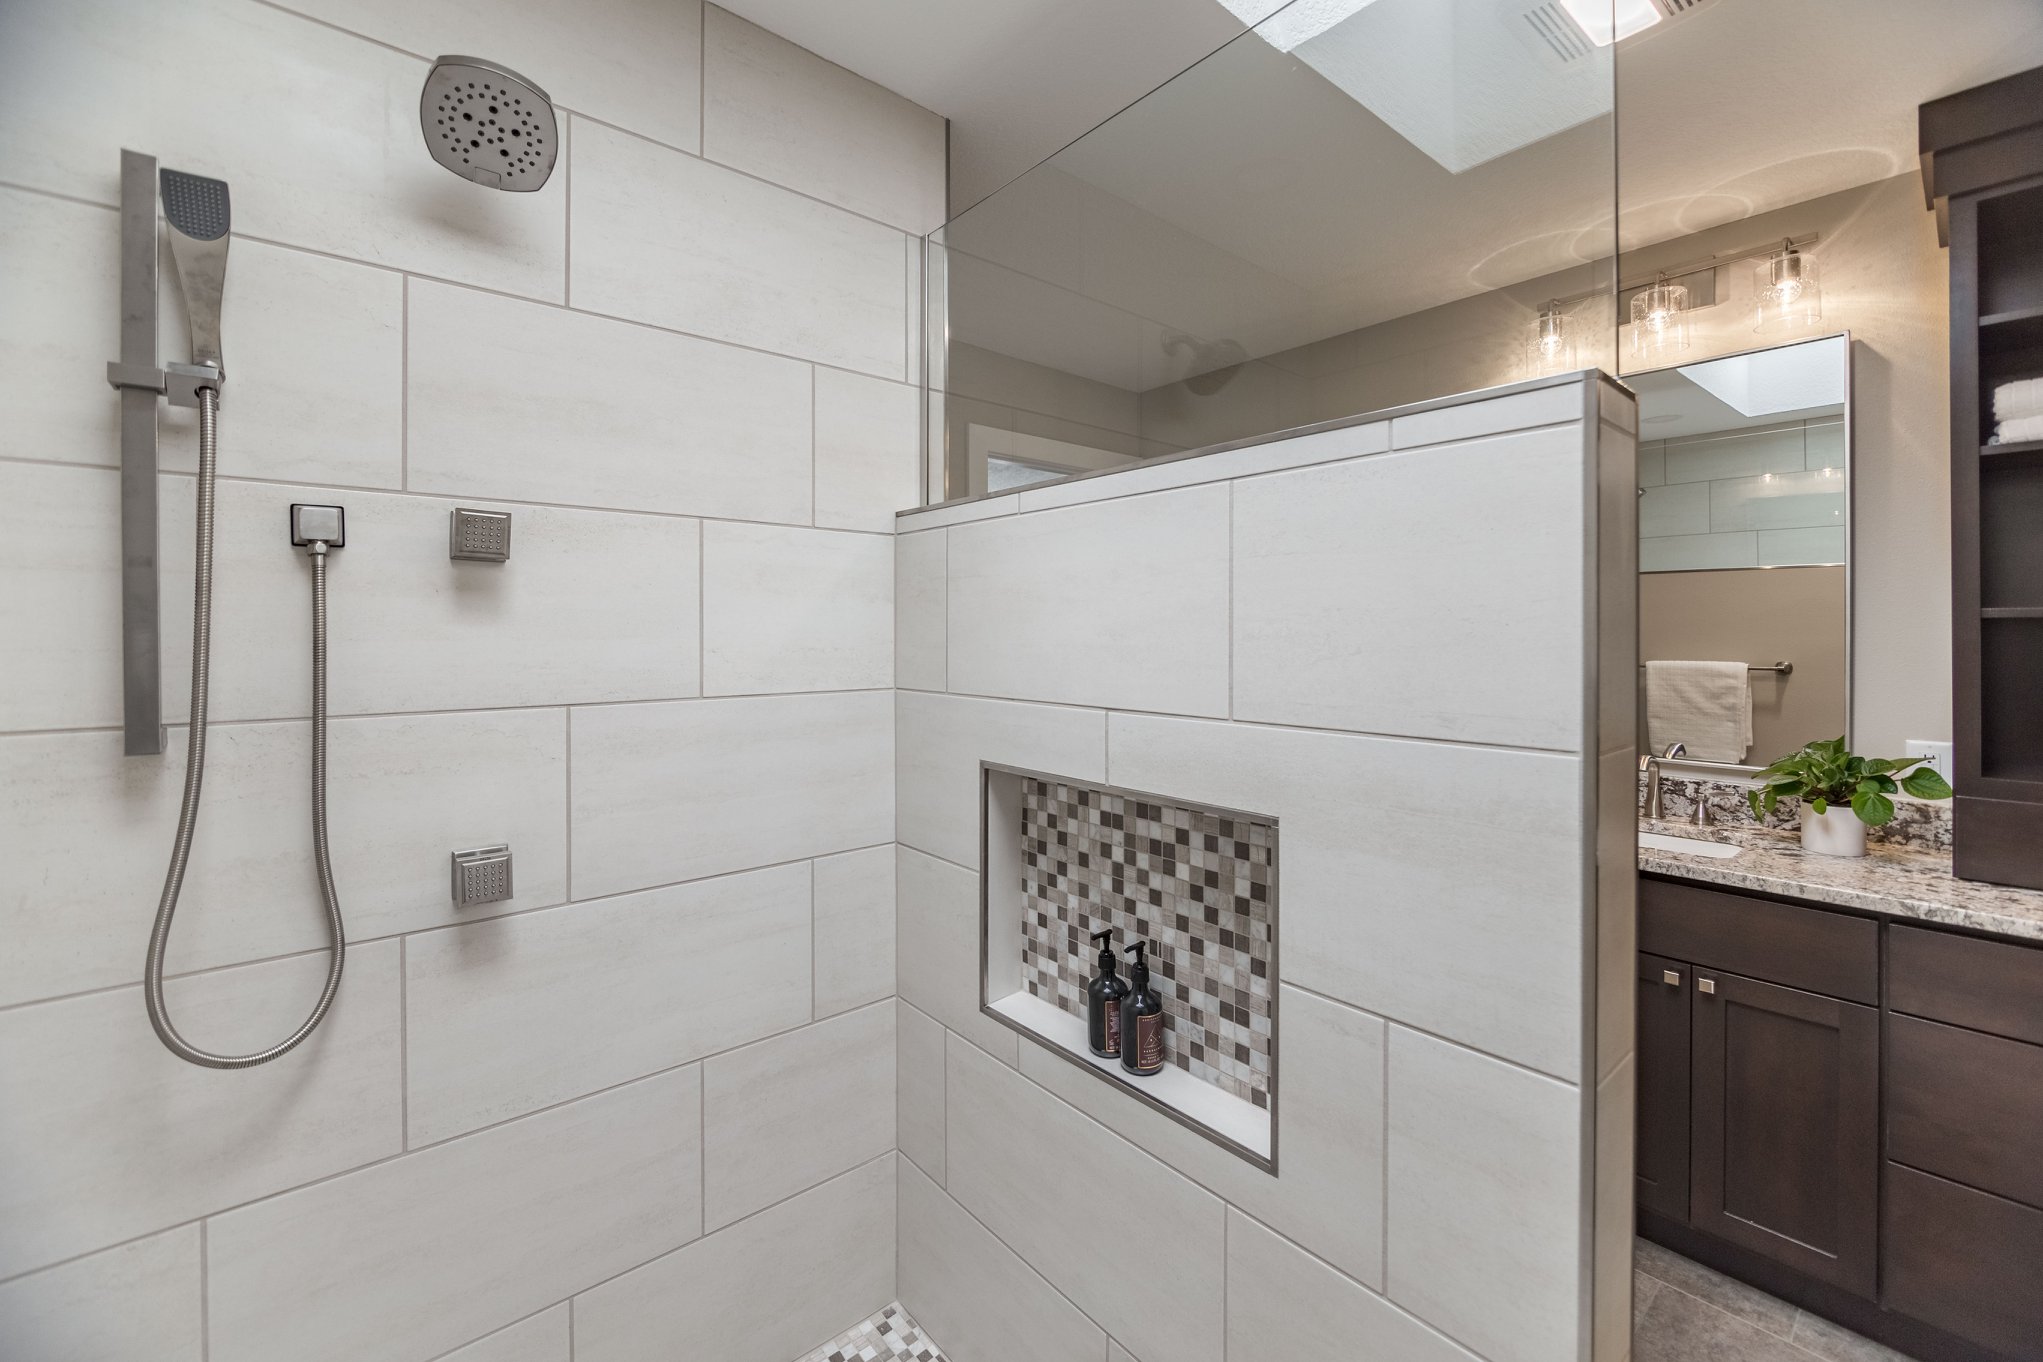 3 Easy Steps to Maintain Your Tile Shower